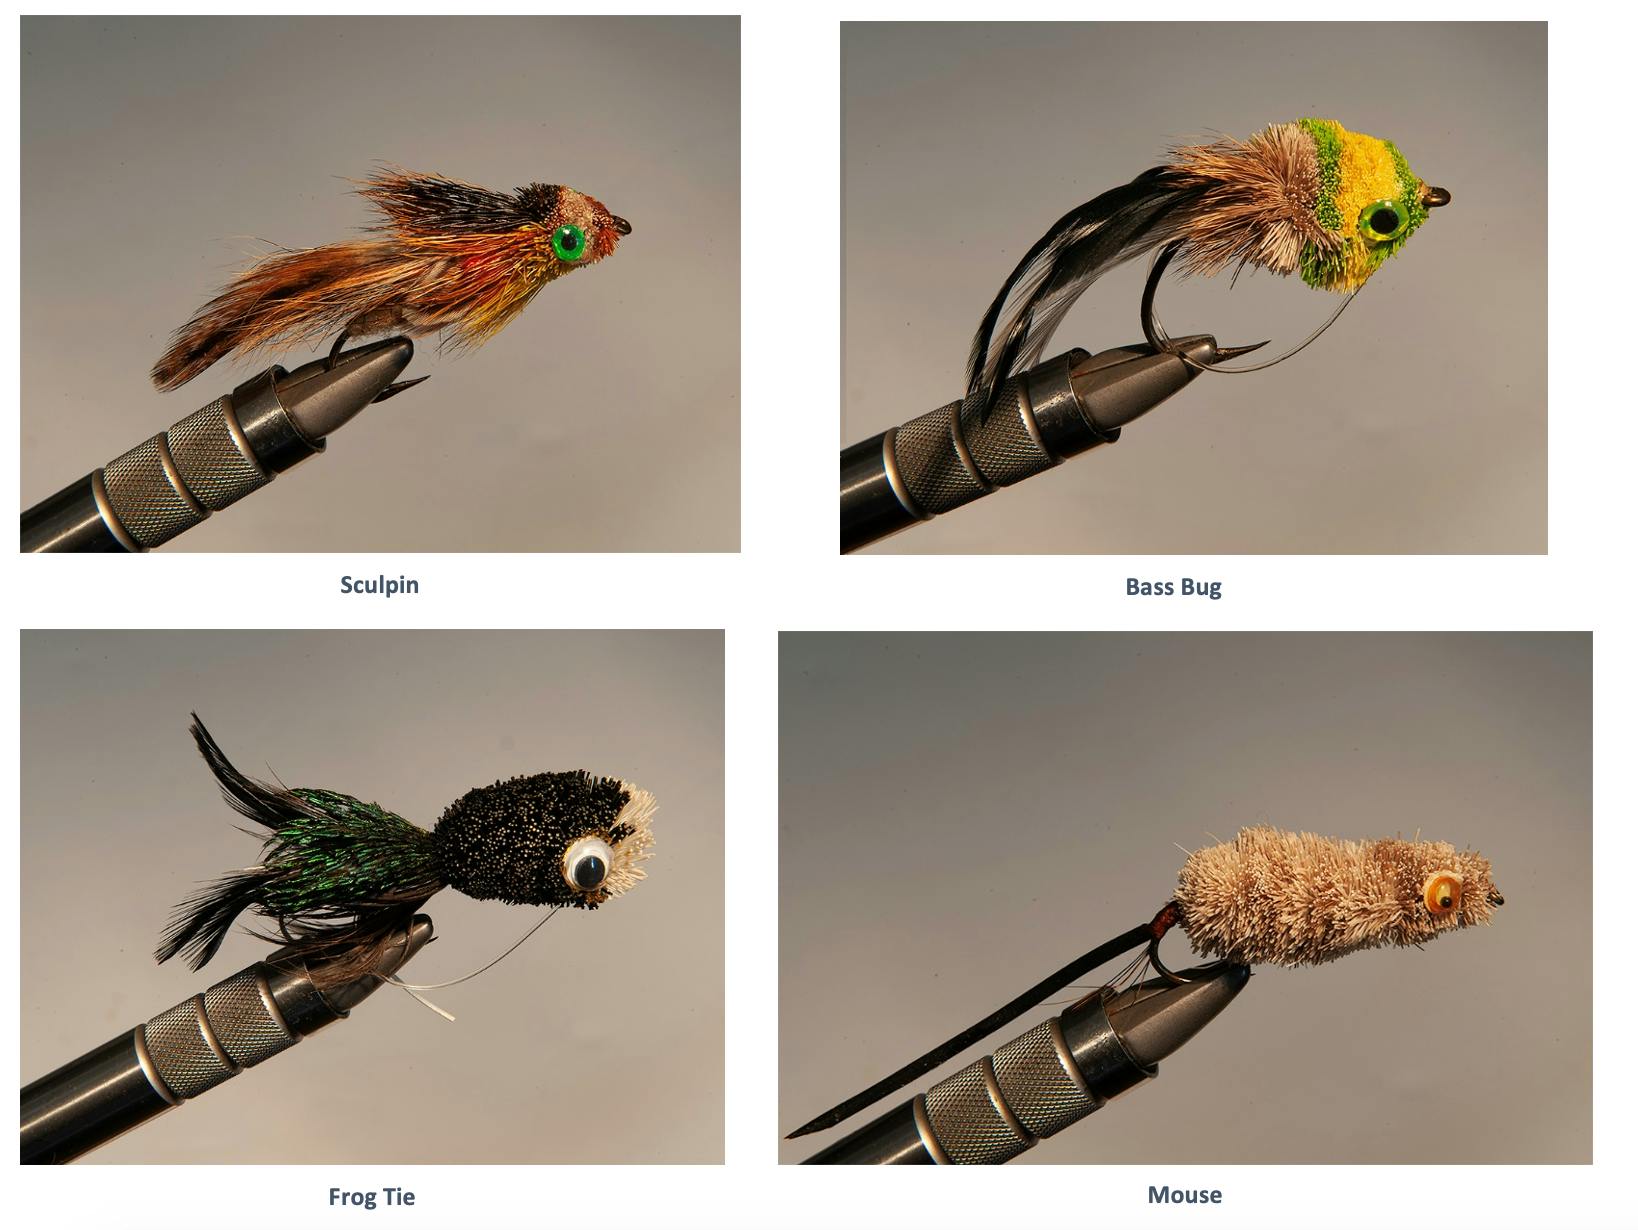 Examples of the flies the author has tied with deer hair. Patterns include the sculpin, the bass bug, the frog tie, and the mouse.